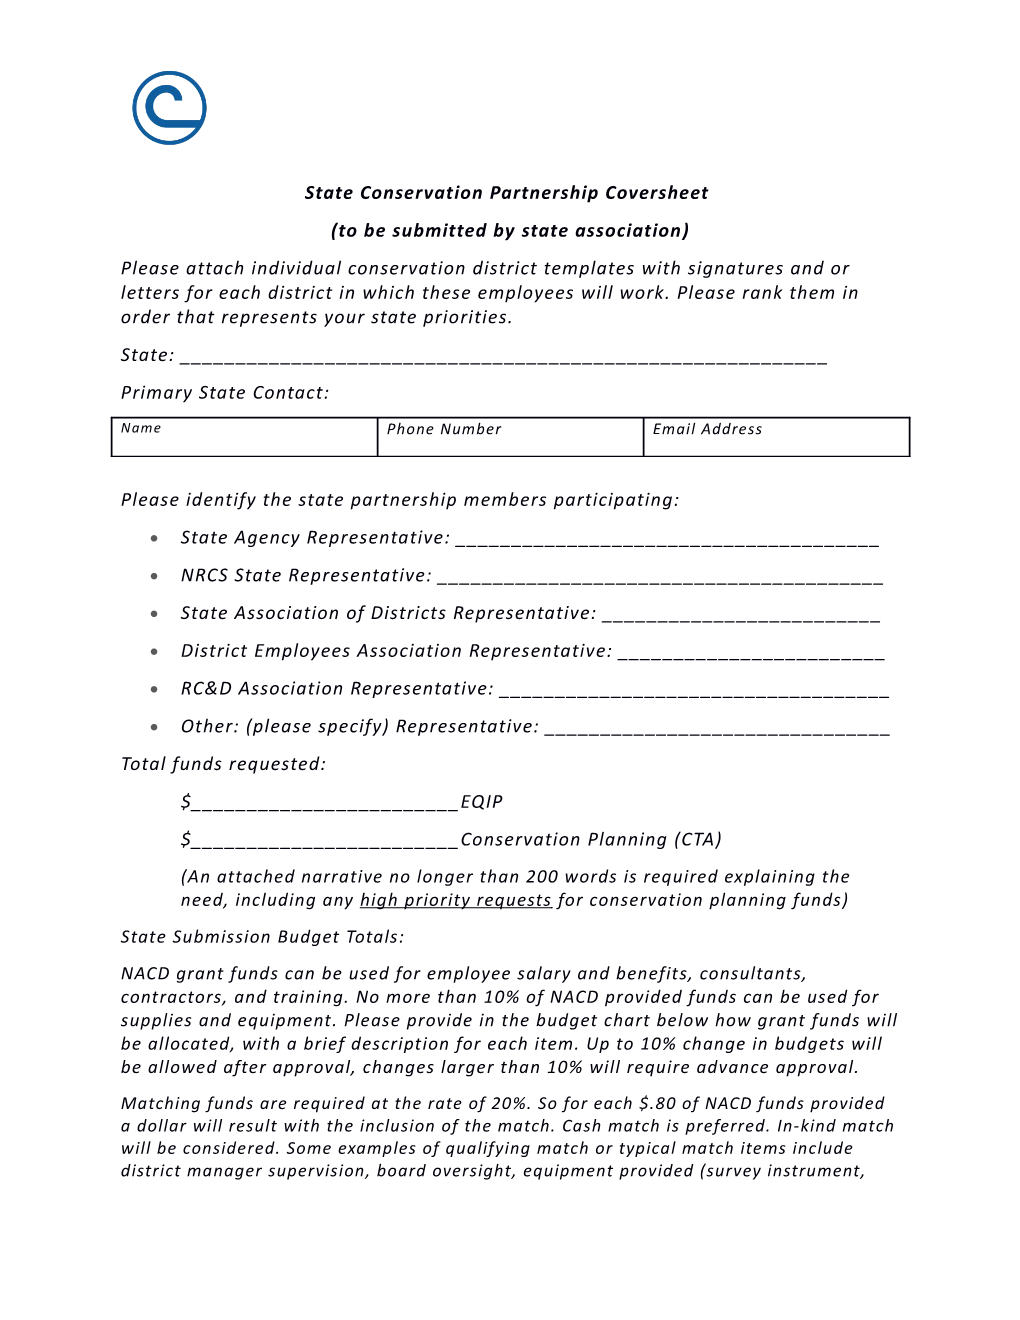 State Conservation Partnership Coversheet